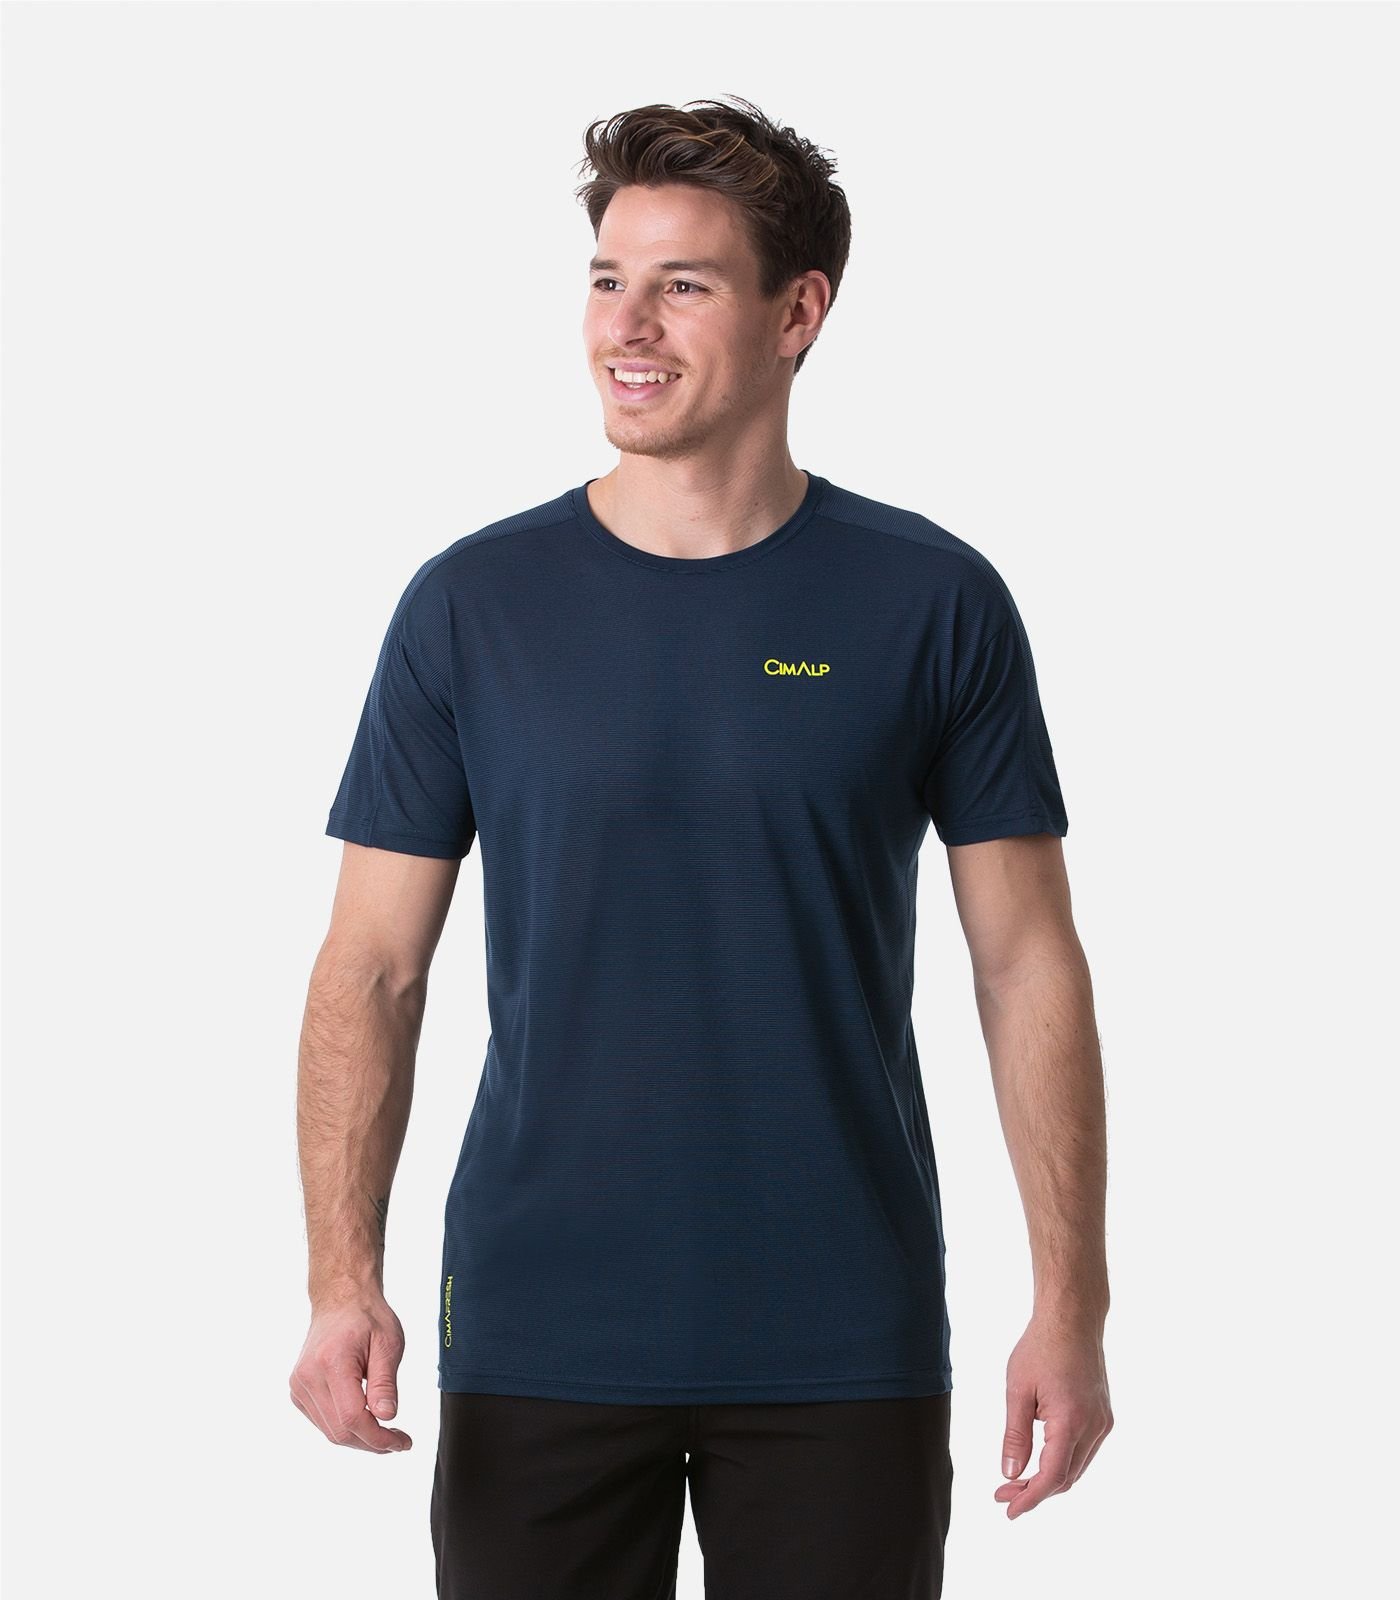 Ultra-light and breathable T-Shirt for Outdoor Sports